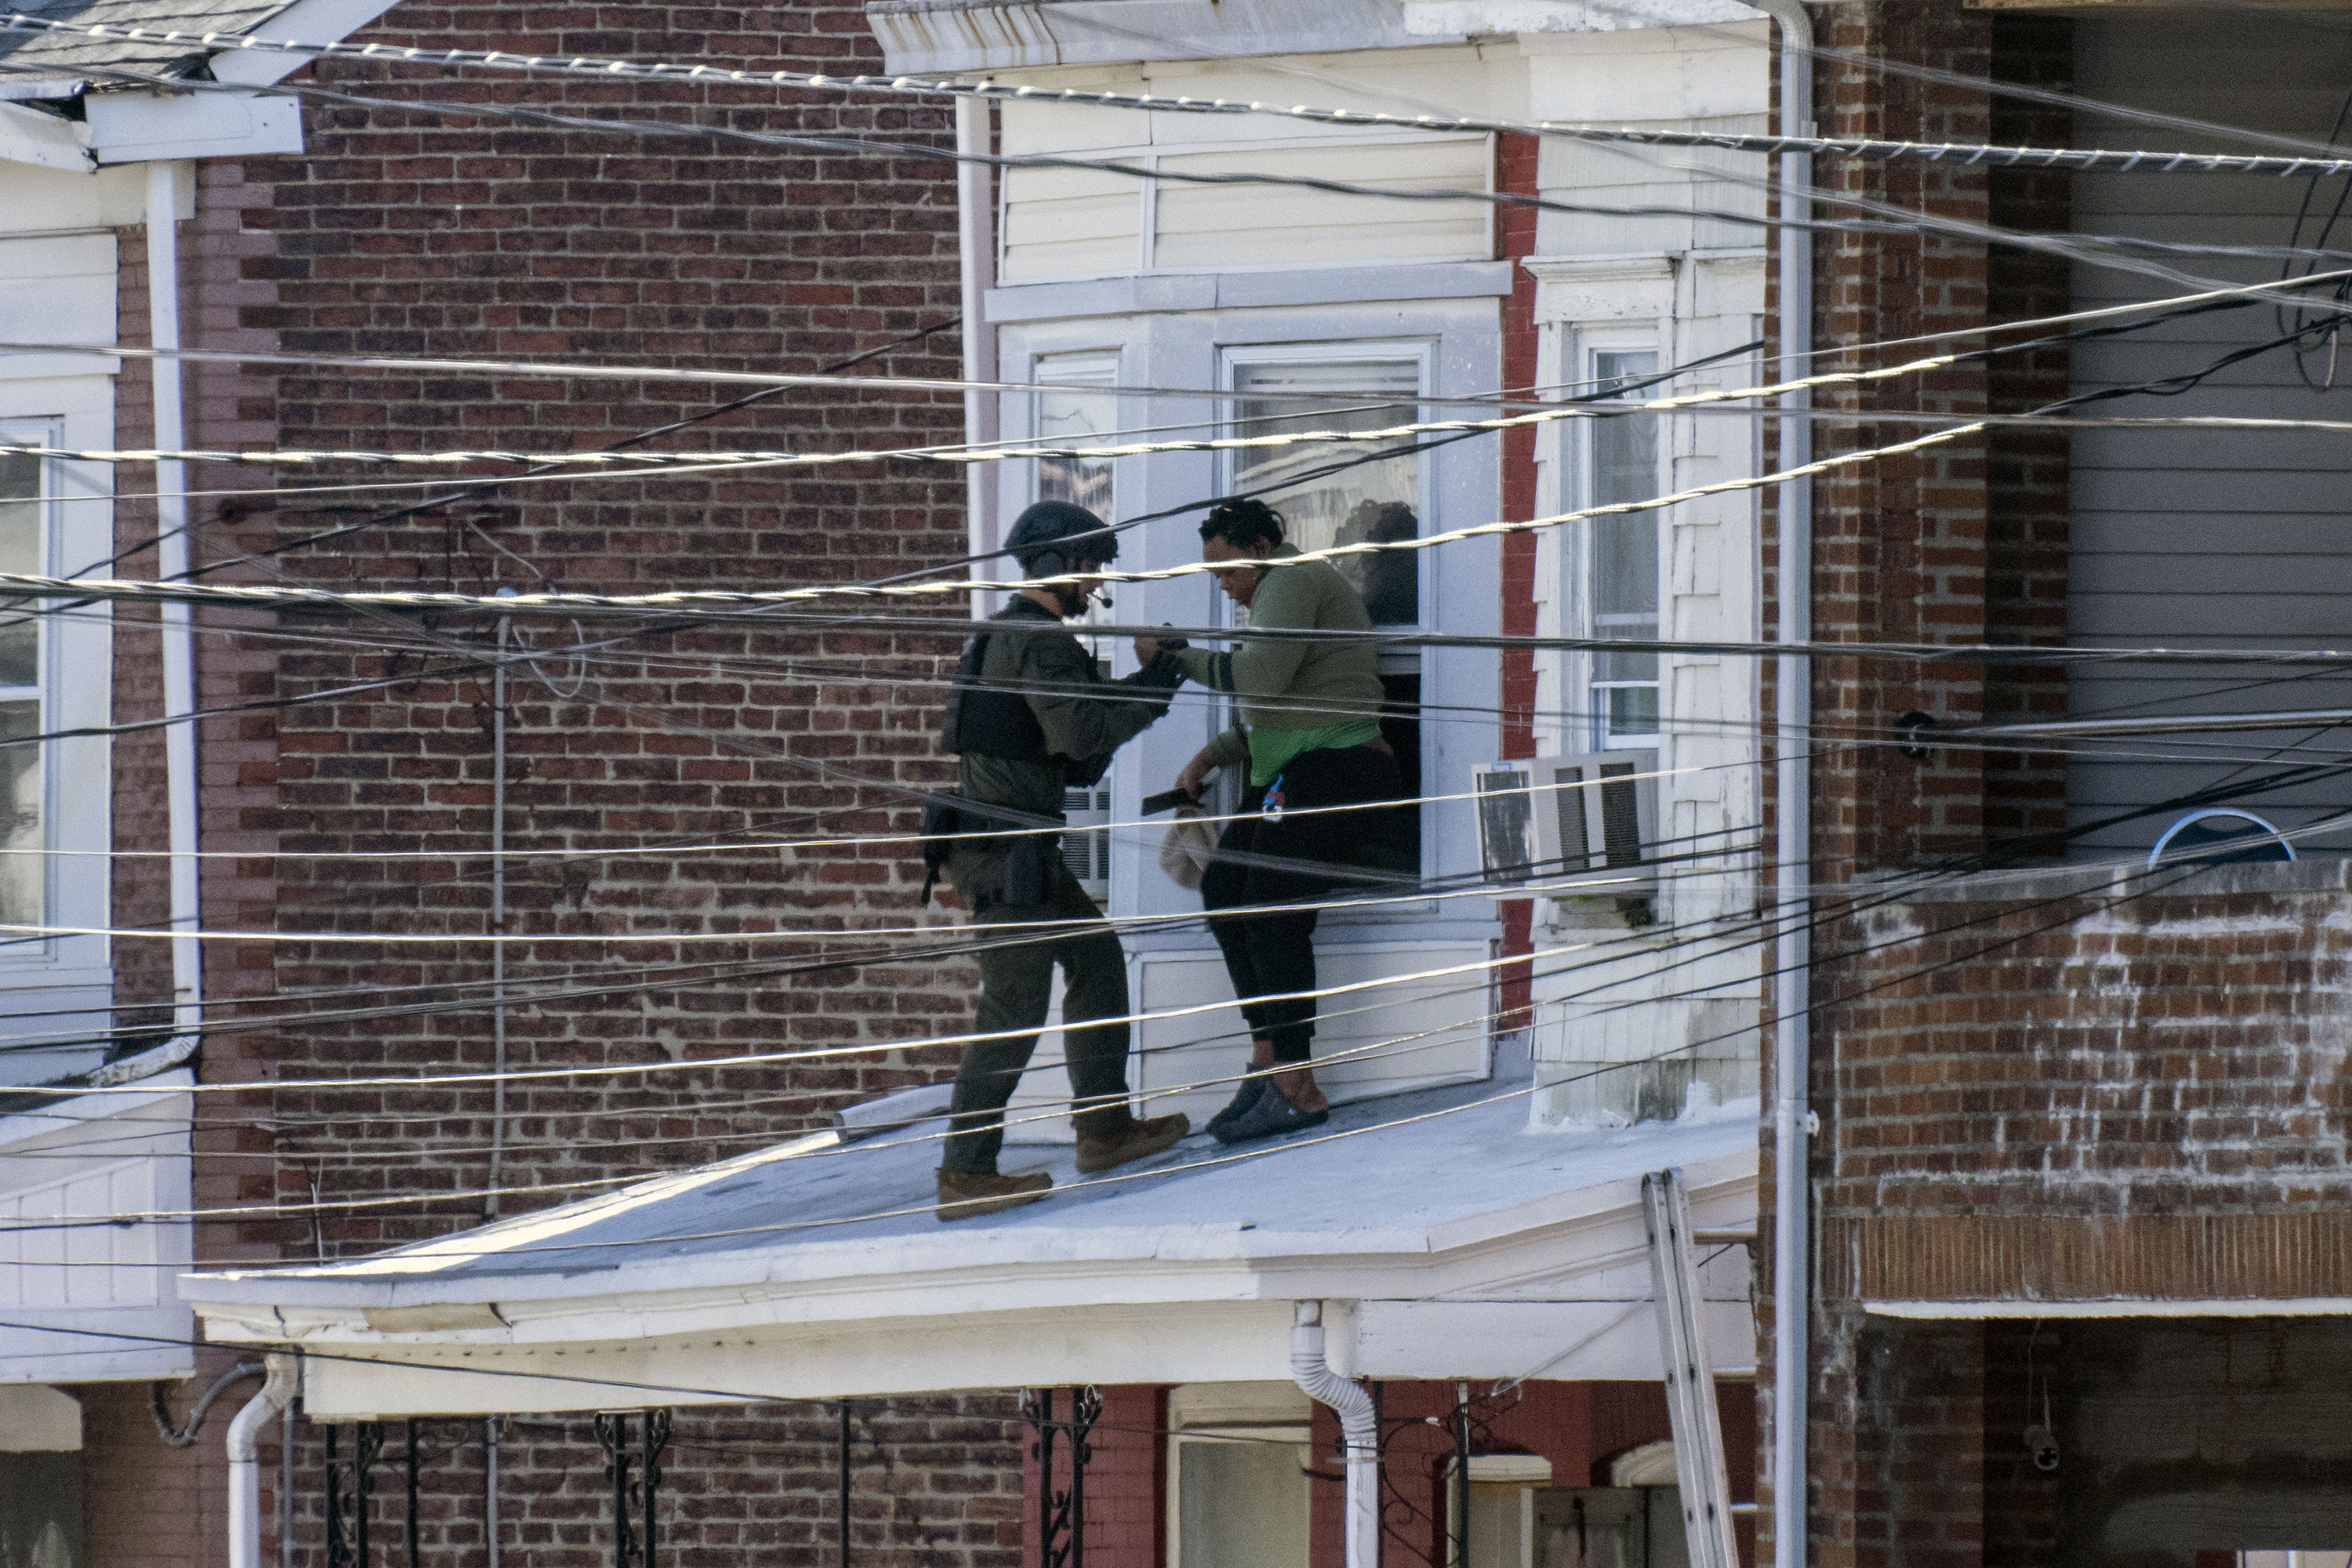 Police remove people from a home in Trenton New Jersey, on March 16, after reports of a gunman, who is suspected of a shooting spree in Pennsylvania, was barricaded in the house.